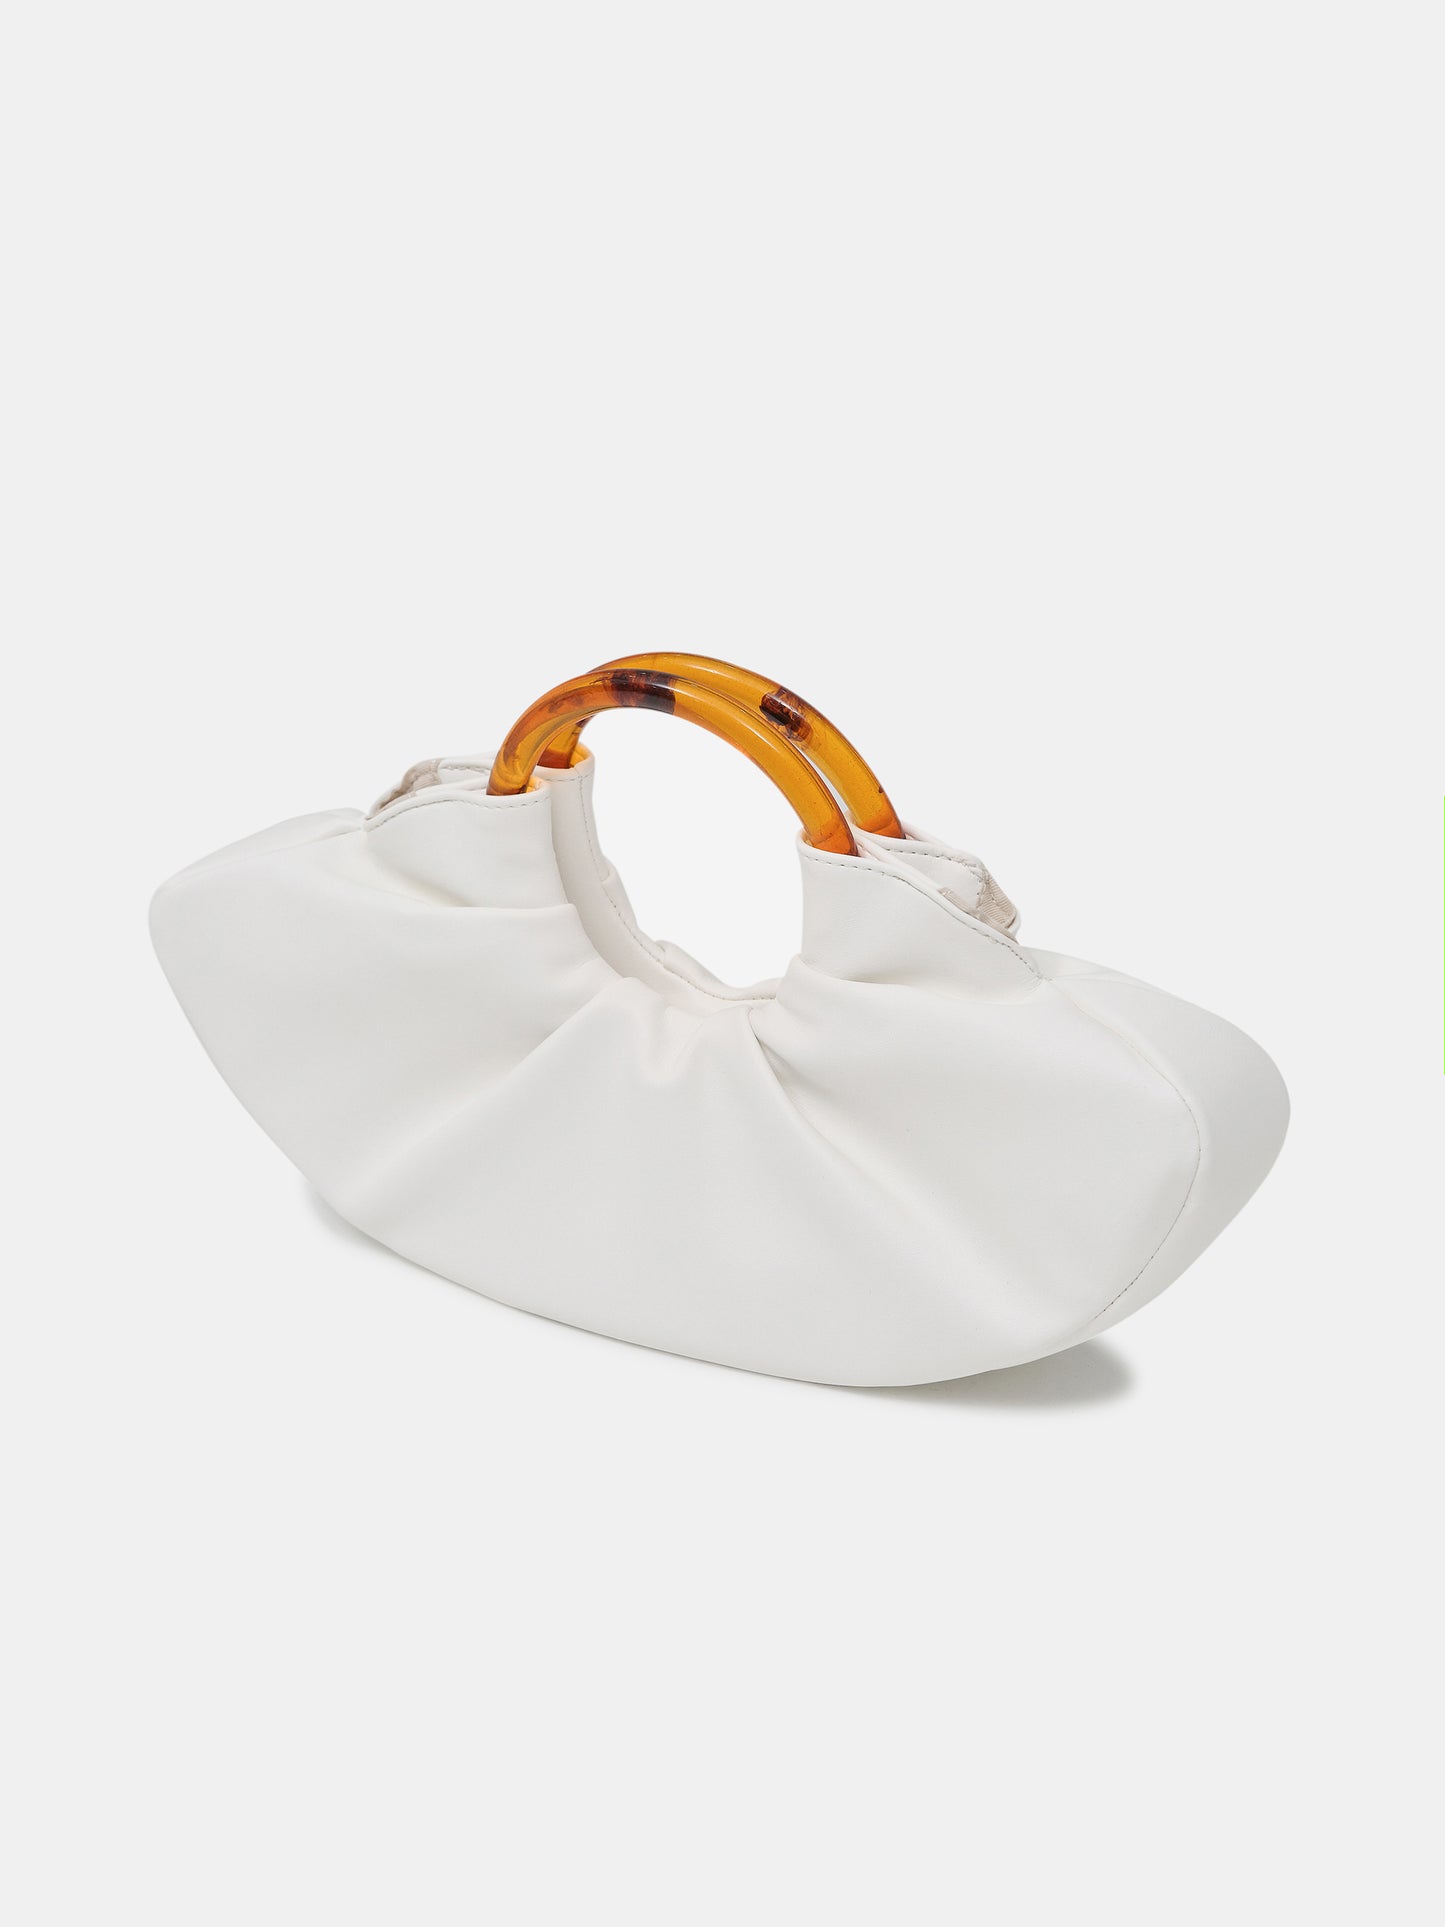 Ruched Shell Bag, White